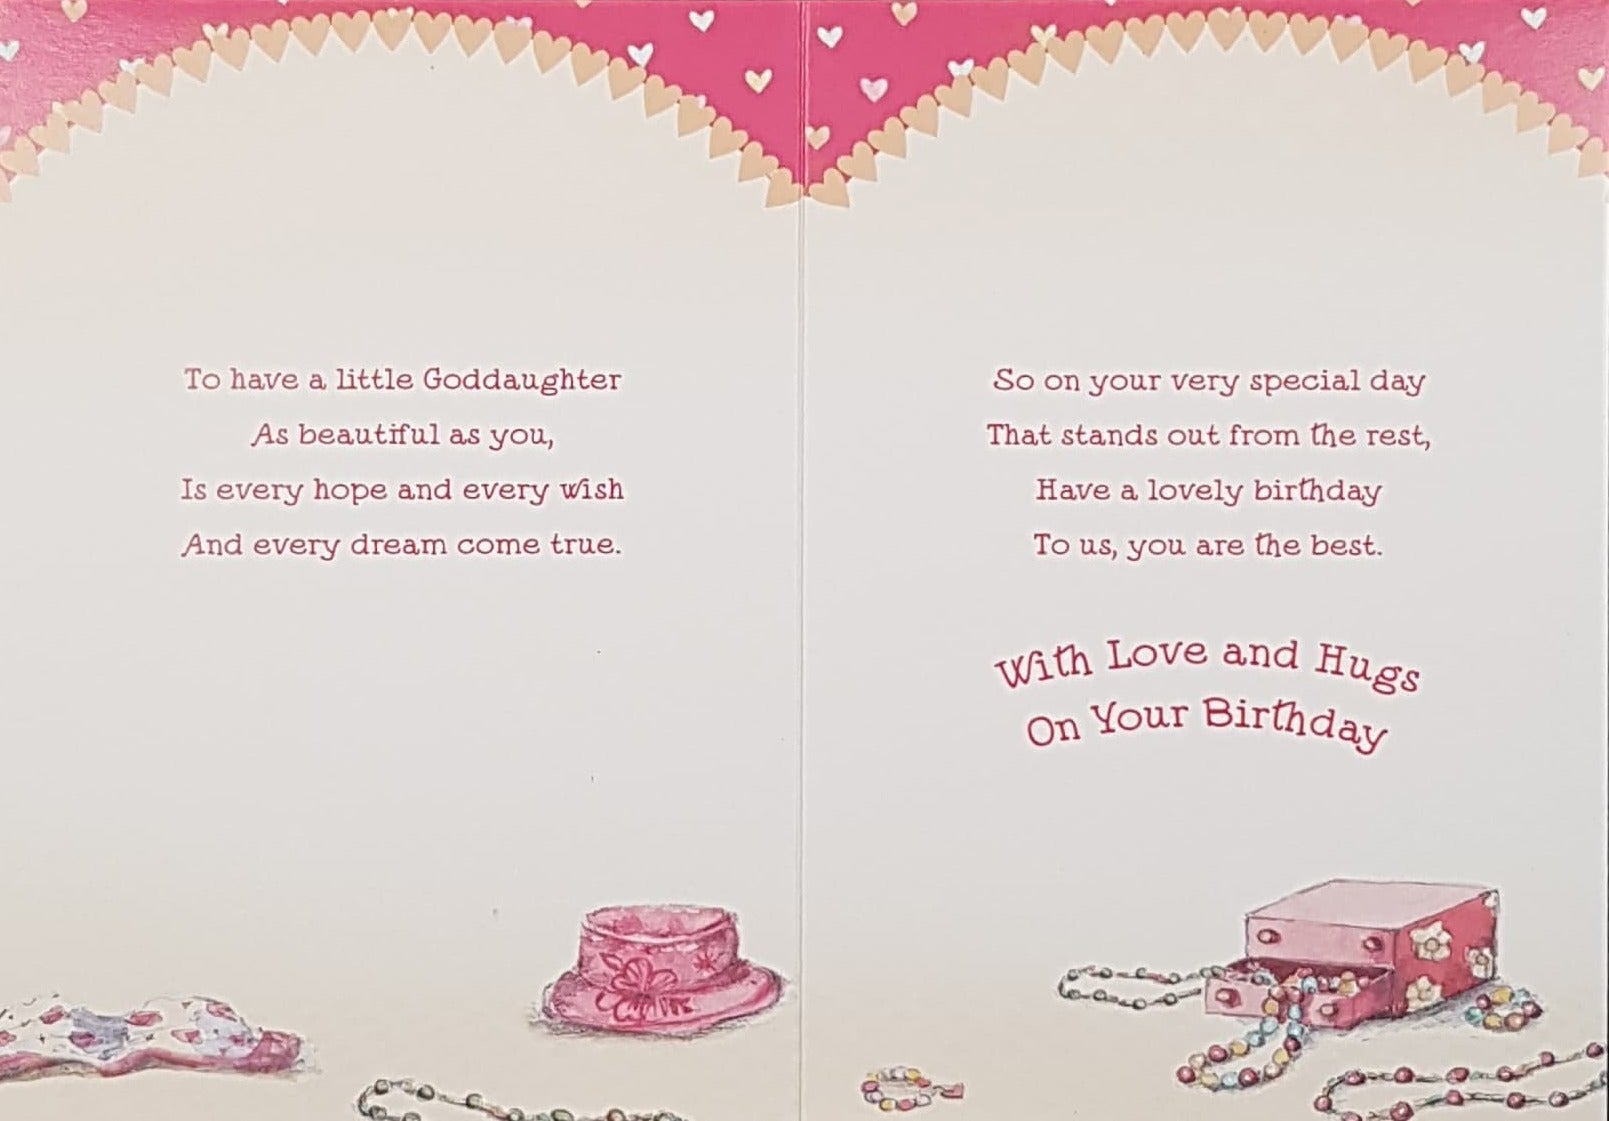 Birthday Card - Goddaughter / A Glamorous Girl In A Pink Dress & Shoes